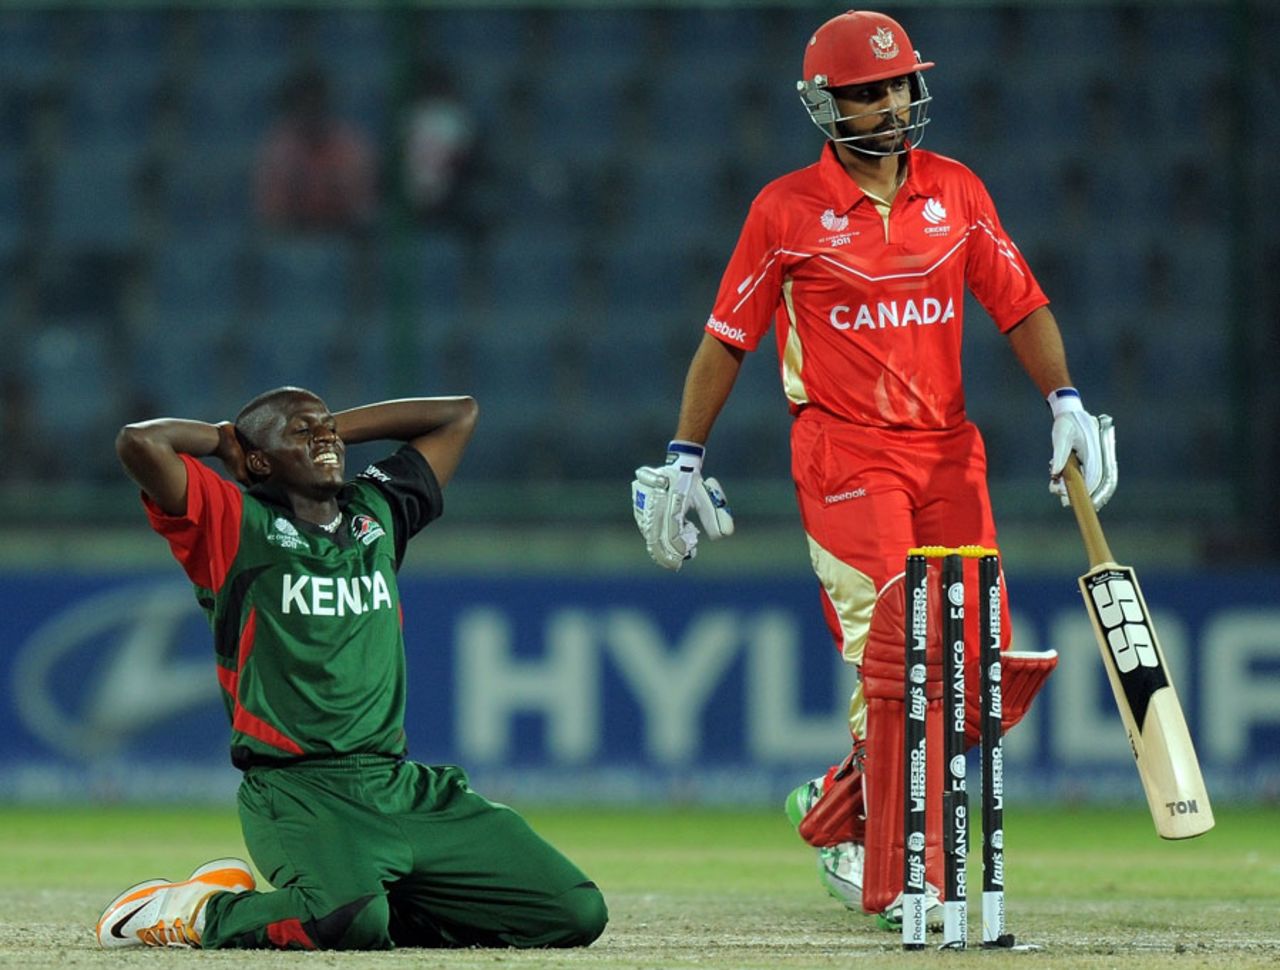 James Ngoche reacts to a dropped catch off his bowling, Canada v Kenya, Group A, World Cup, Delhi, March 7, 2011